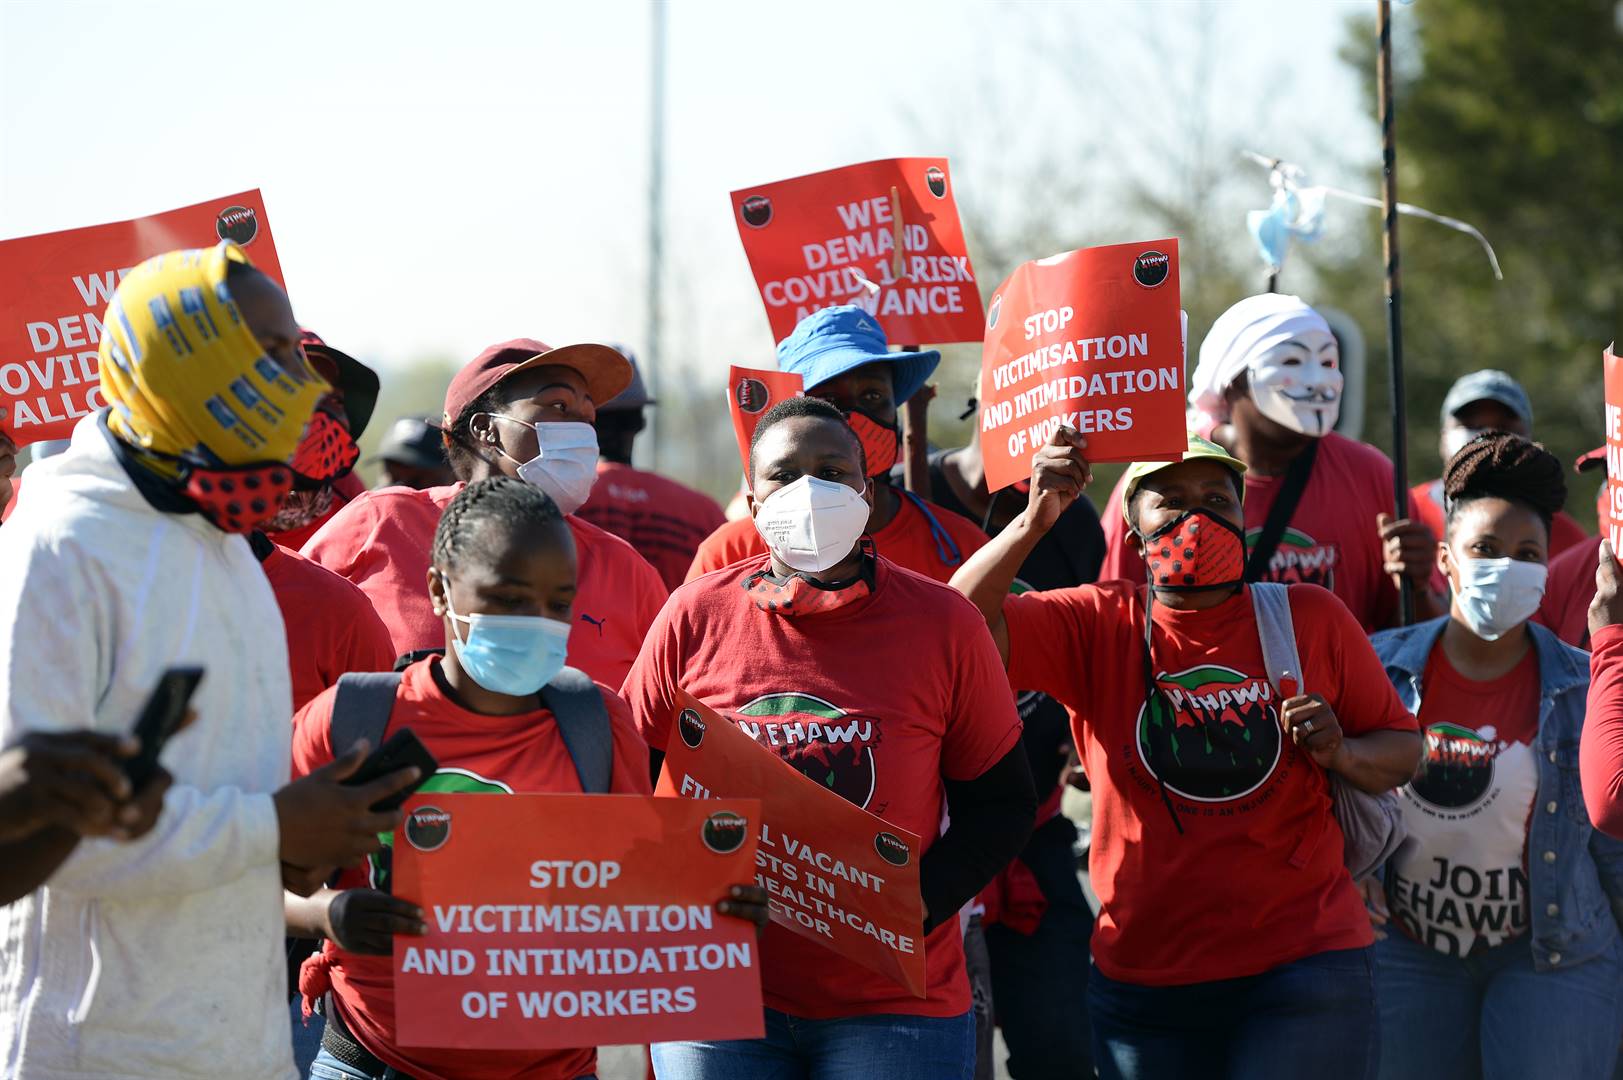 Nehawu will protest outside the Union Buildings on Monday.